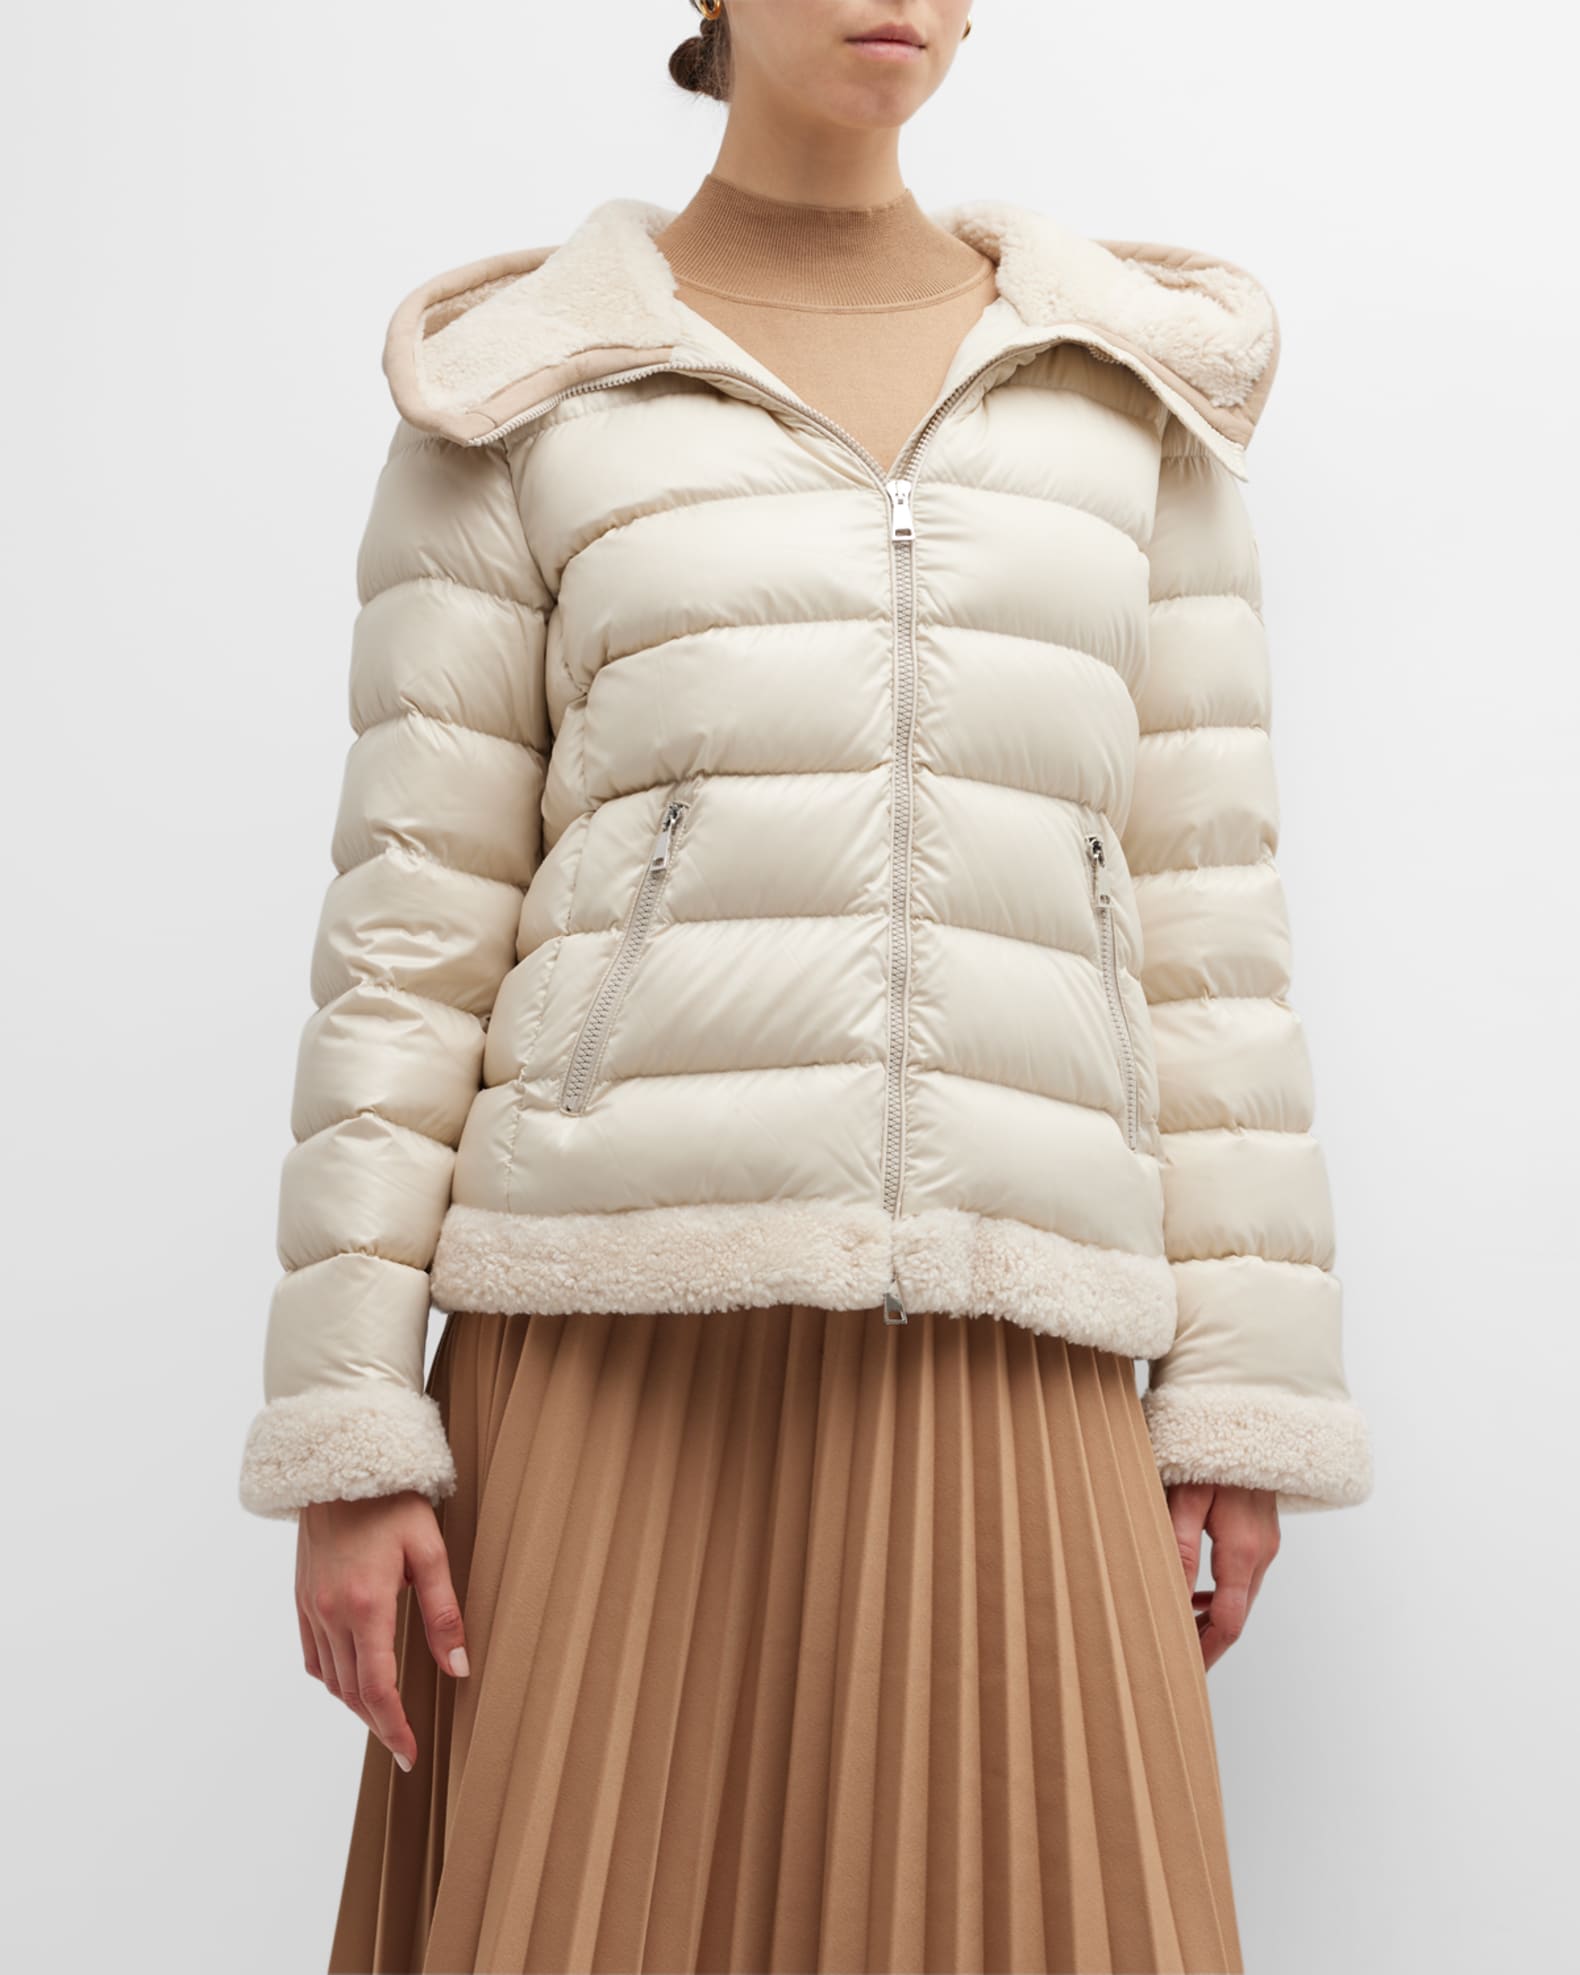 Moncler Guichard Shearling-Lined Puffer Jacket | Neiman Marcus